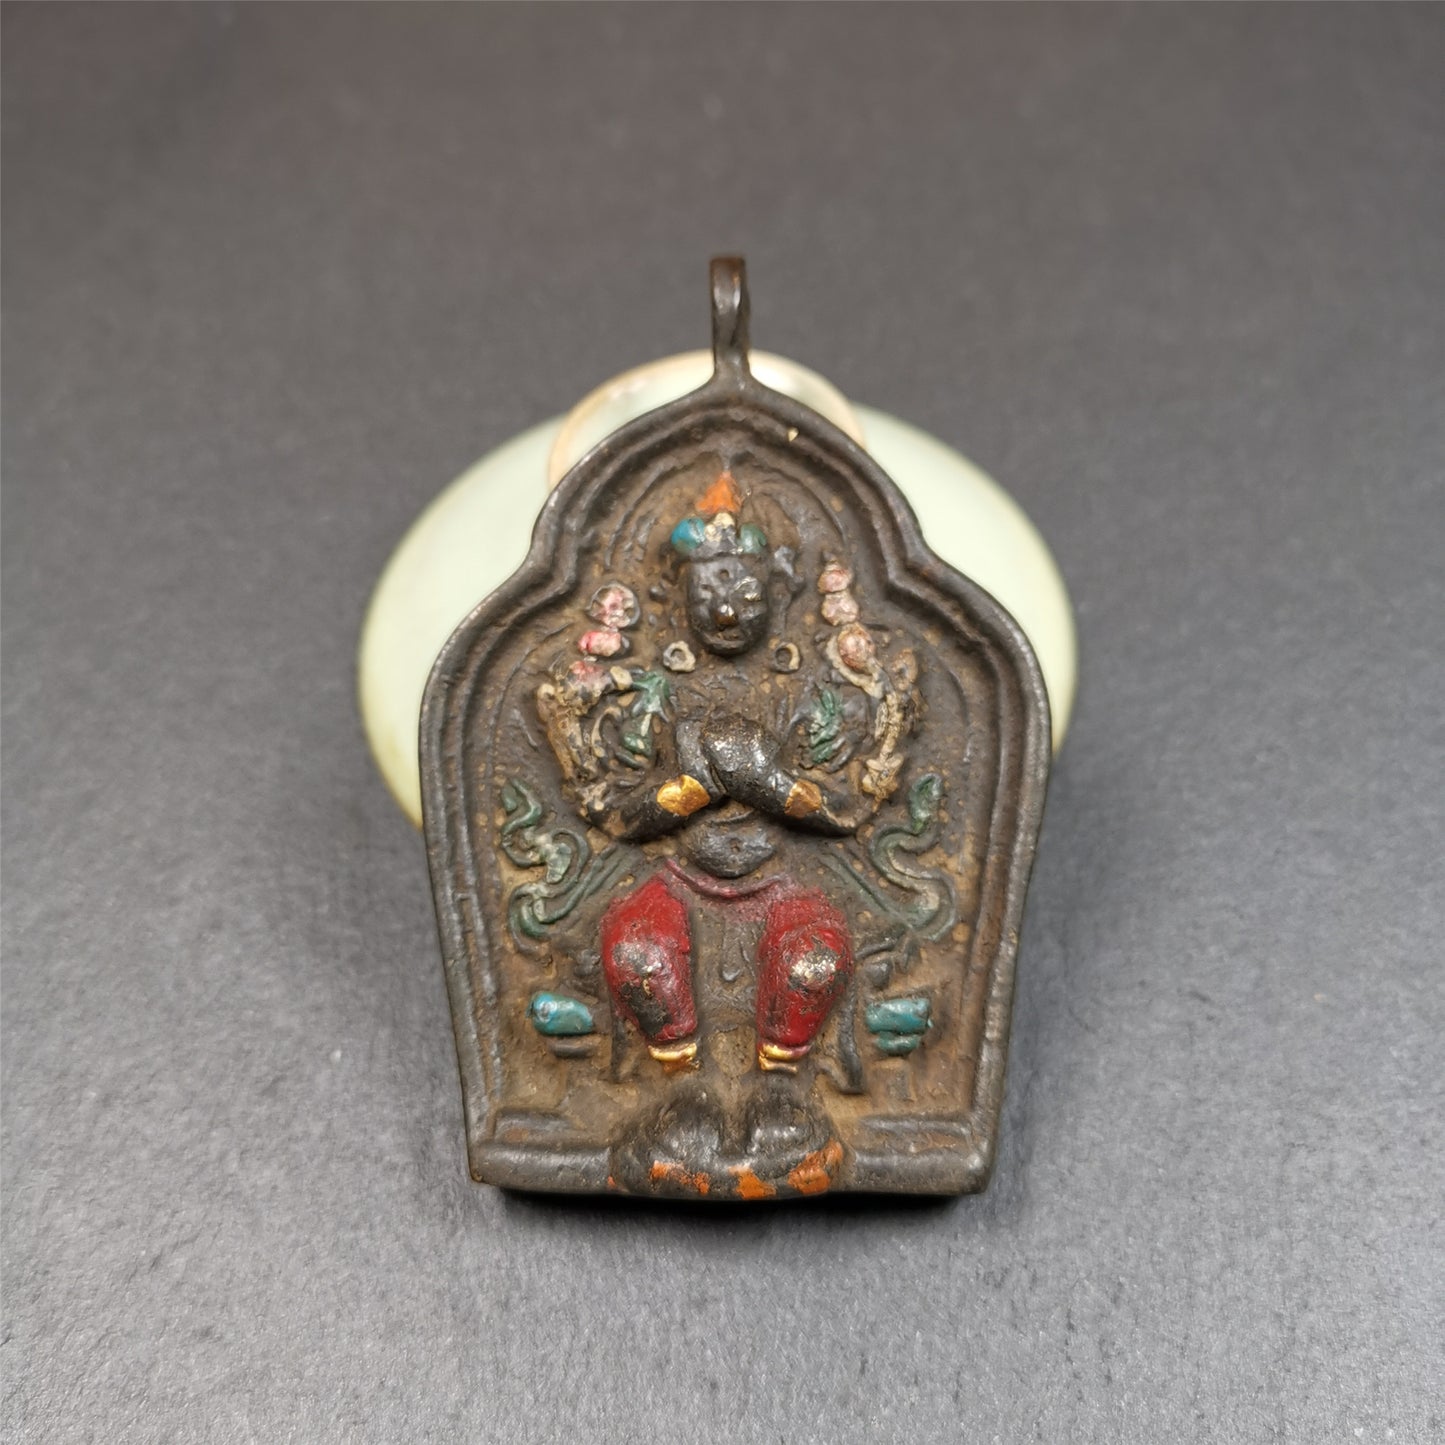 This maitreya statue was collected from Labrang Monastery,Qinghai,about 80 years old. It is an amulet of maitreya,made of copper,painted with mineral pigments,size is 2.95 by 1.97 inches,about 80 years old.